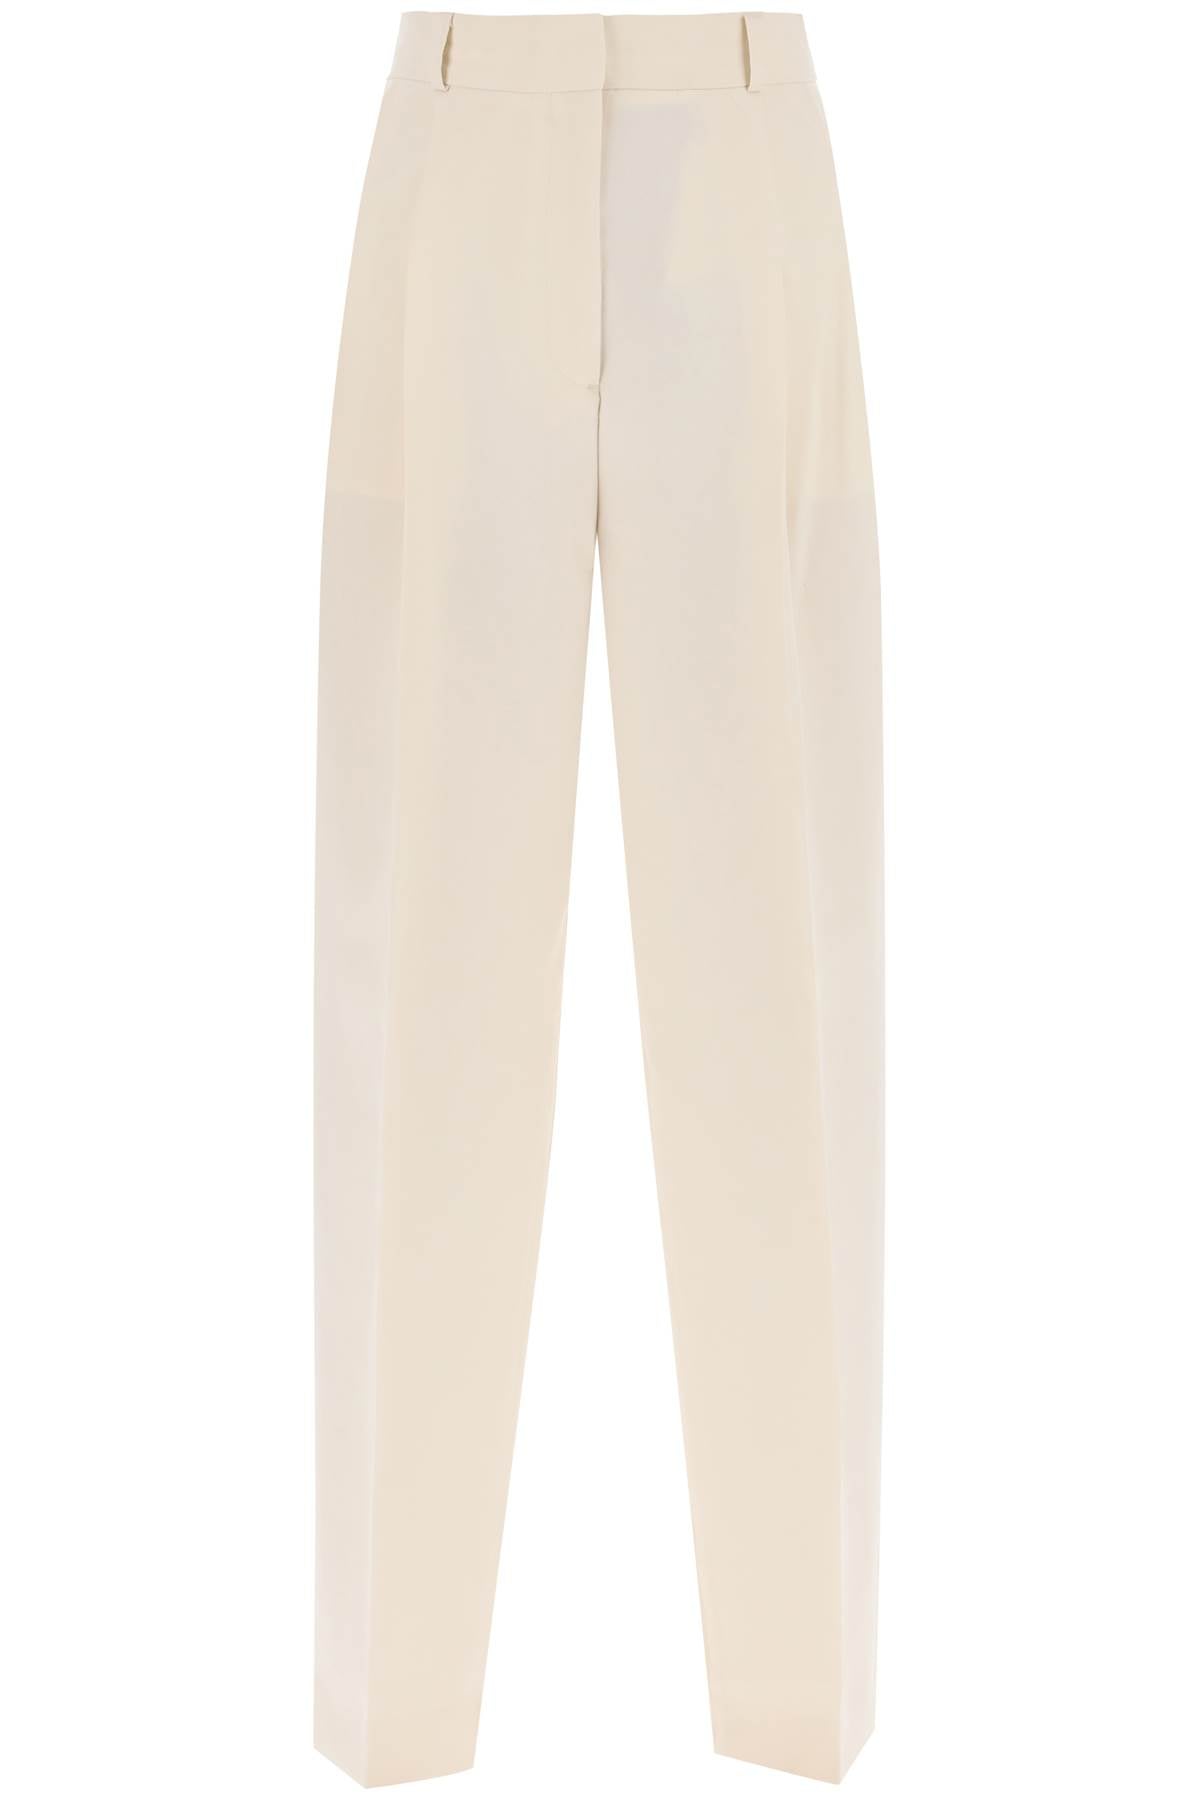 TOTÊME DOUBLE PLEATED VISCOSE TROUSERS